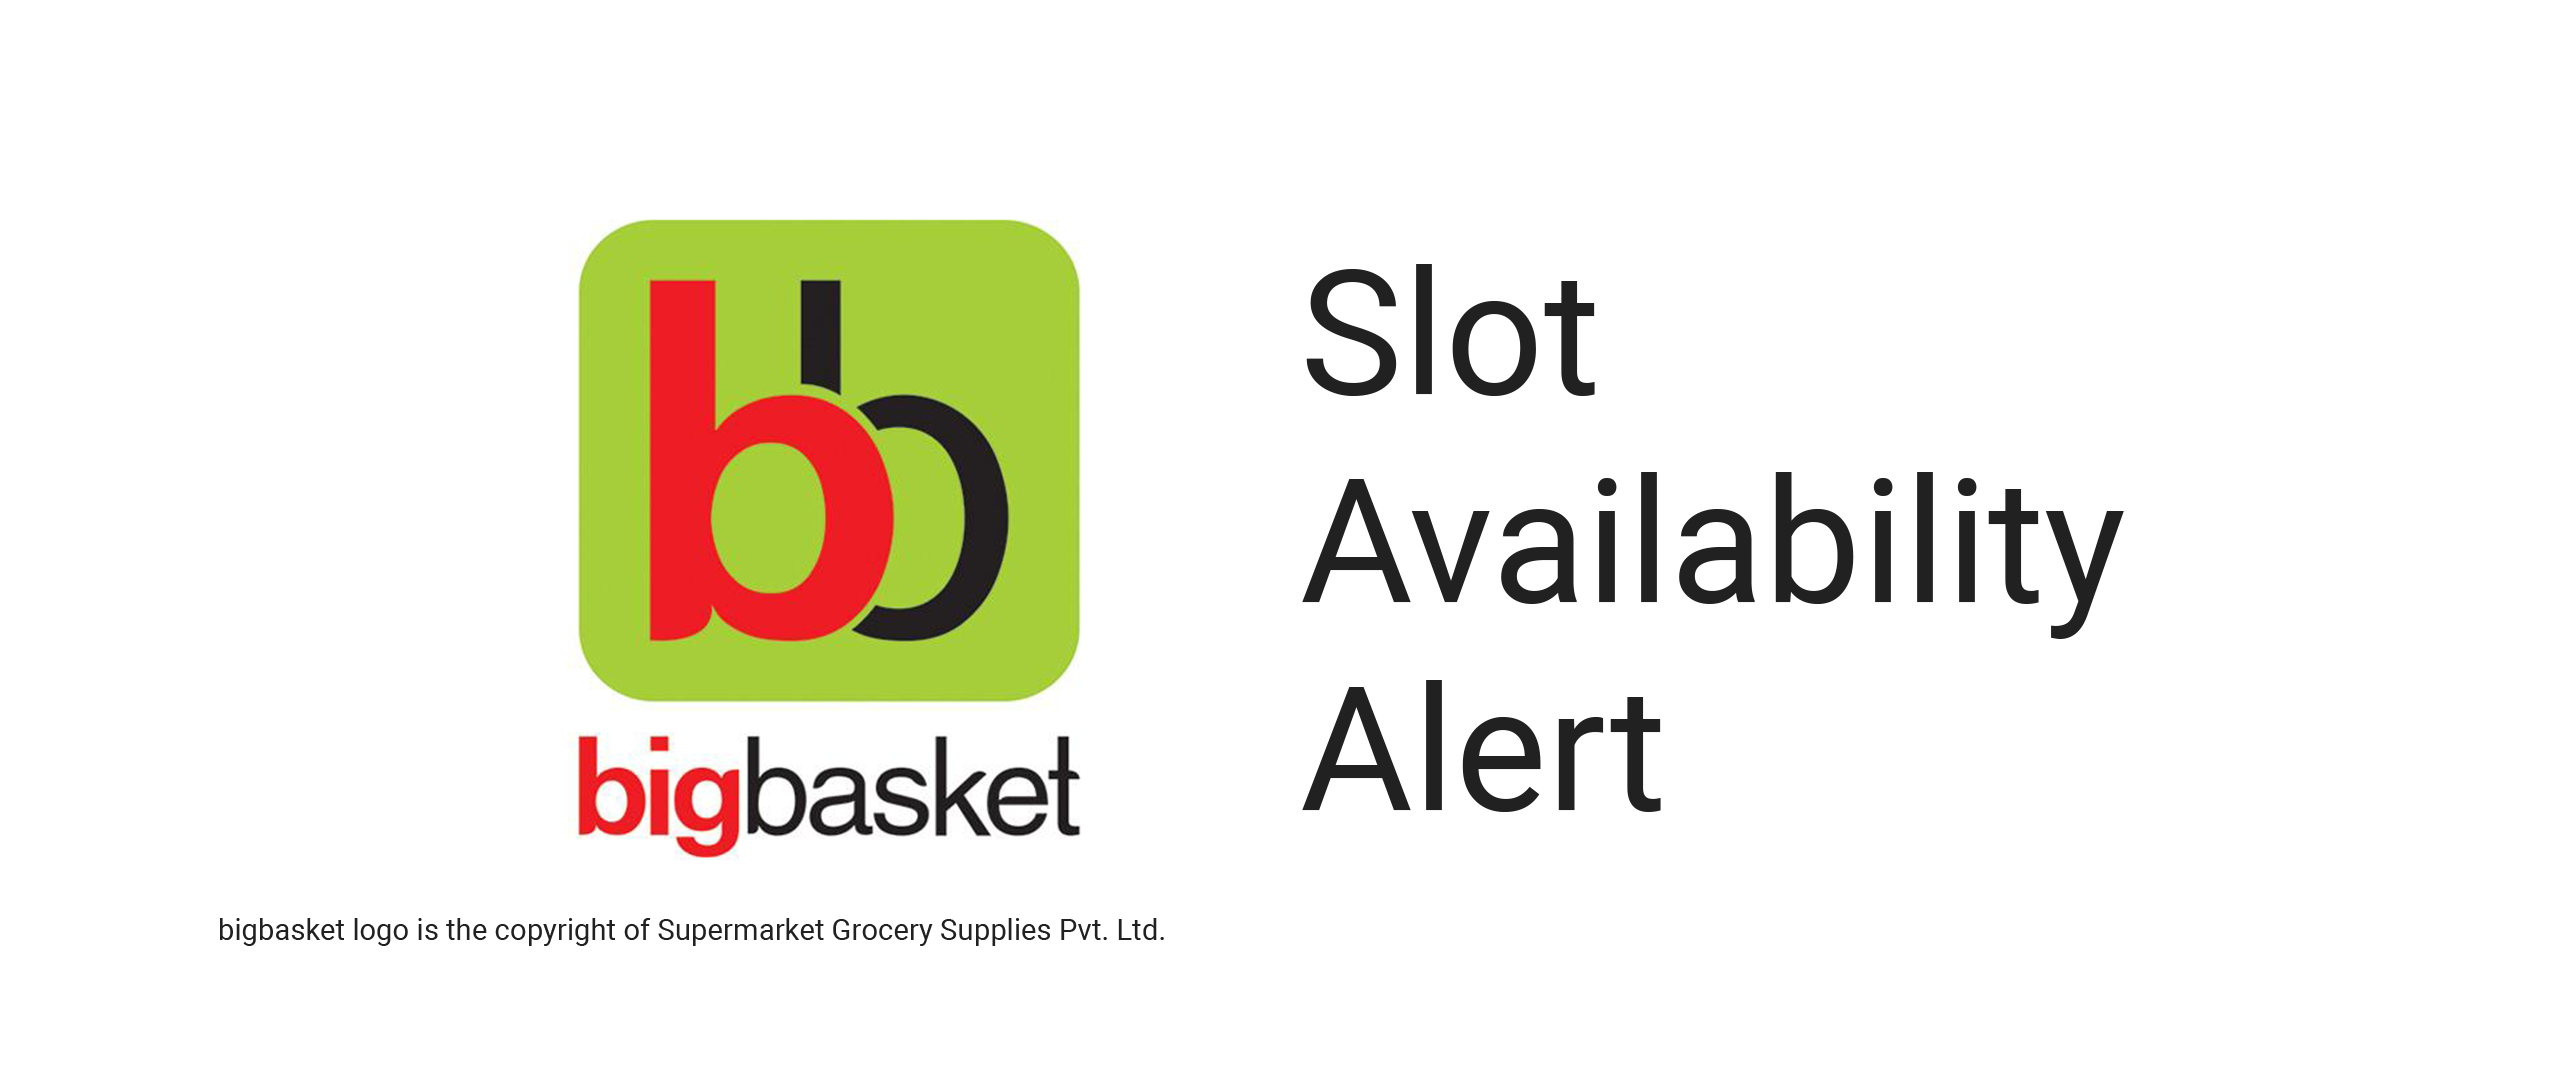 Push notifications when BigBasket slots are available